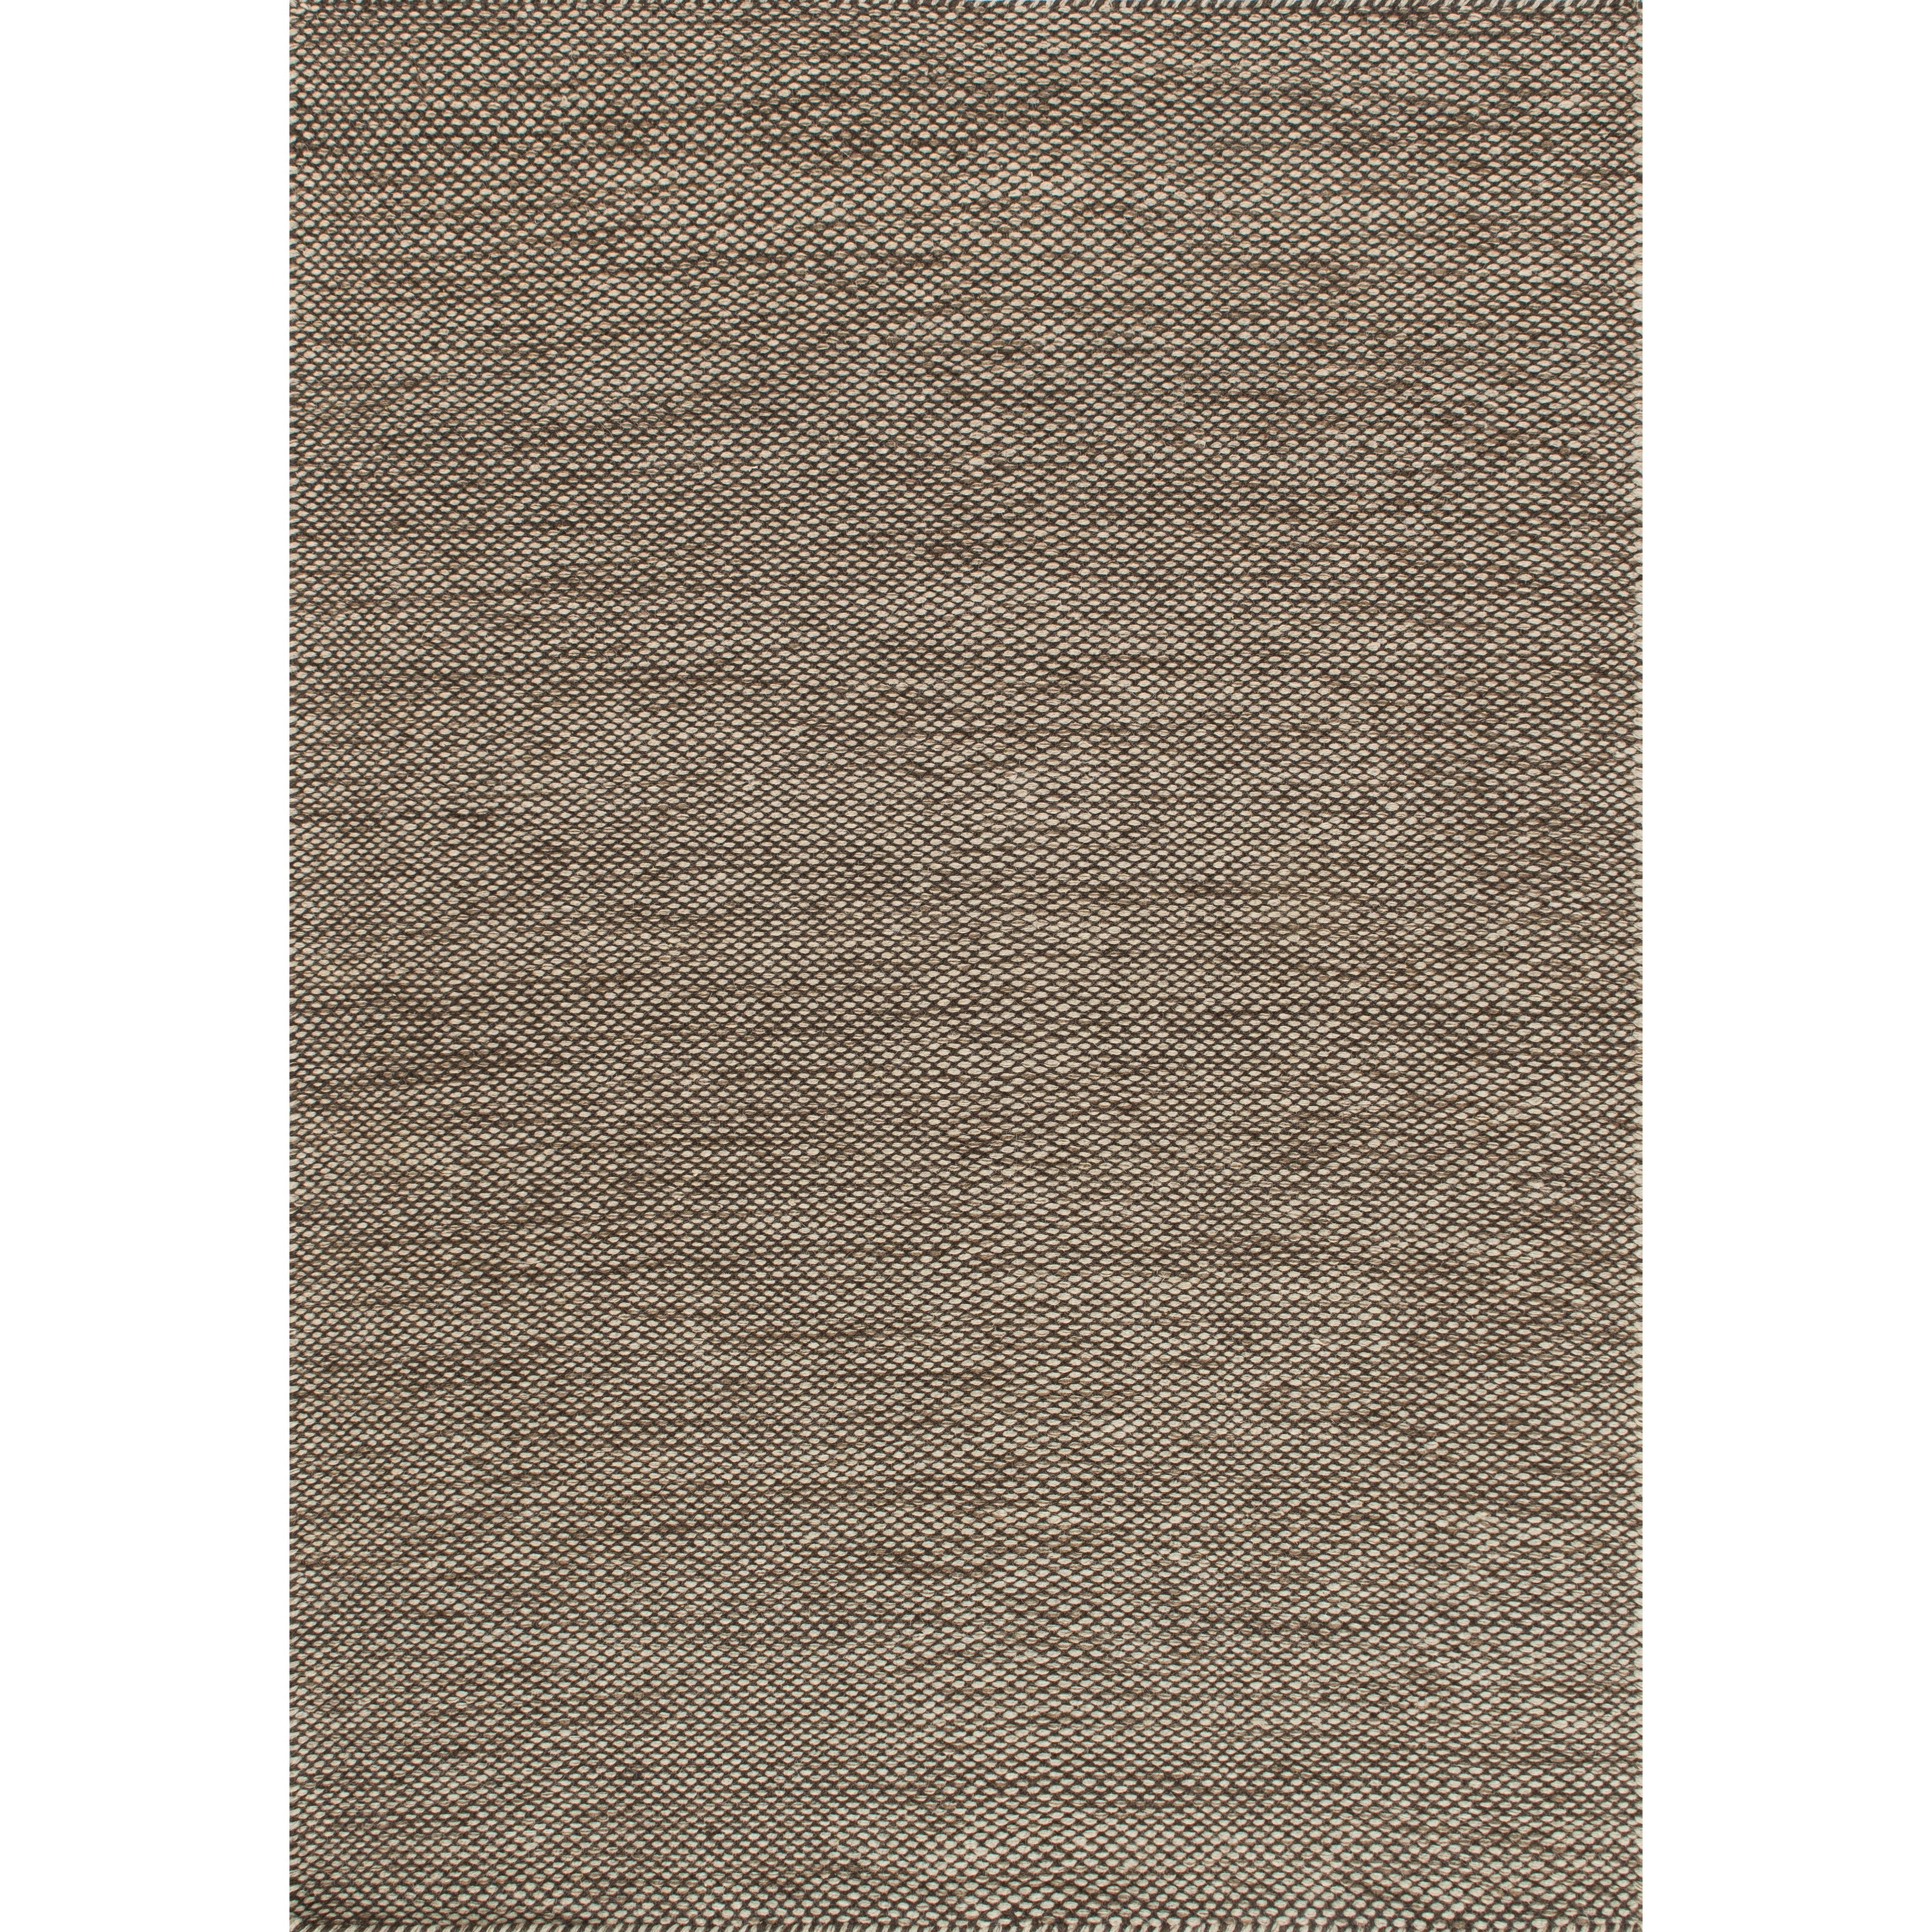 Oakwood Stone Rug - Amethyst Home The flatwoven Oakwood Collection is an earthy neutral that benefits from natural, dye-free wool. The handwoven rugs have an intricate speckled look, thanks to the nature of pure, fine wool. Oakwood is a sleek option that will add superior texture without pattern. It comes in Wheat, Stone, Natural, Gravel, and Dune.